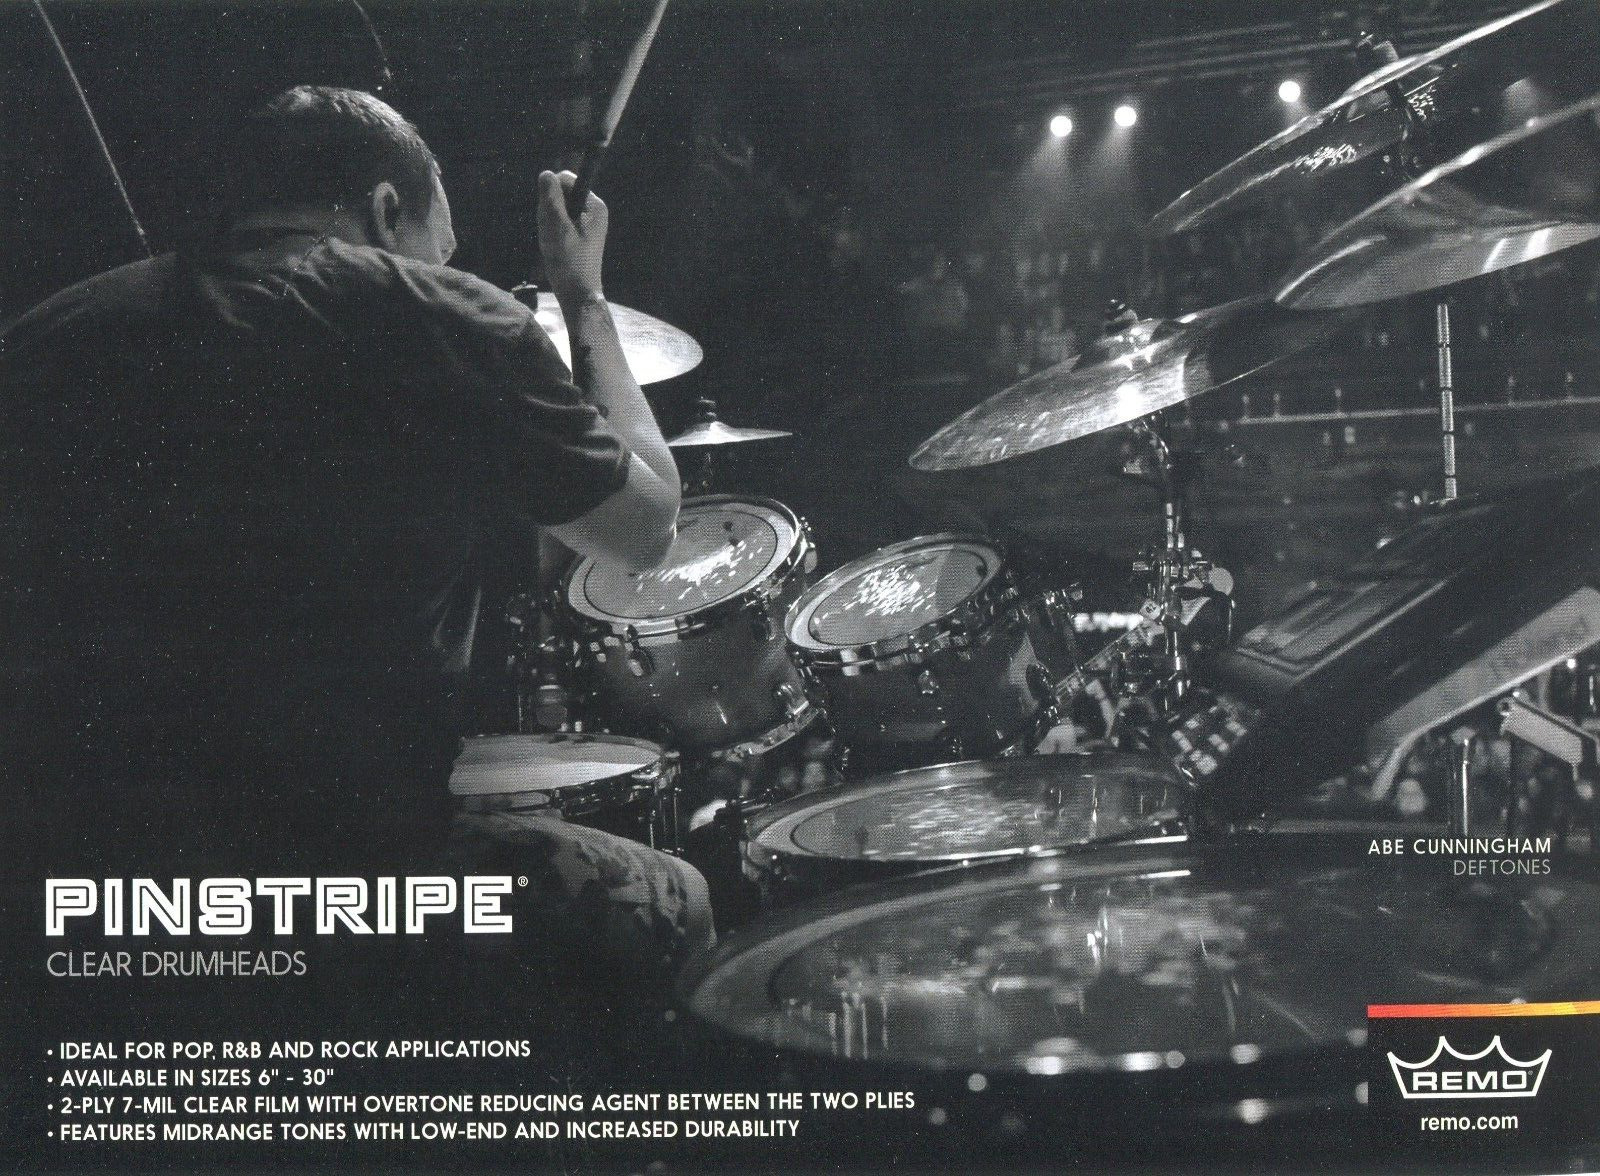 2016 Print Ad of Remo Pinstripe Clear Drumheads w Abe Cunningham Deftones